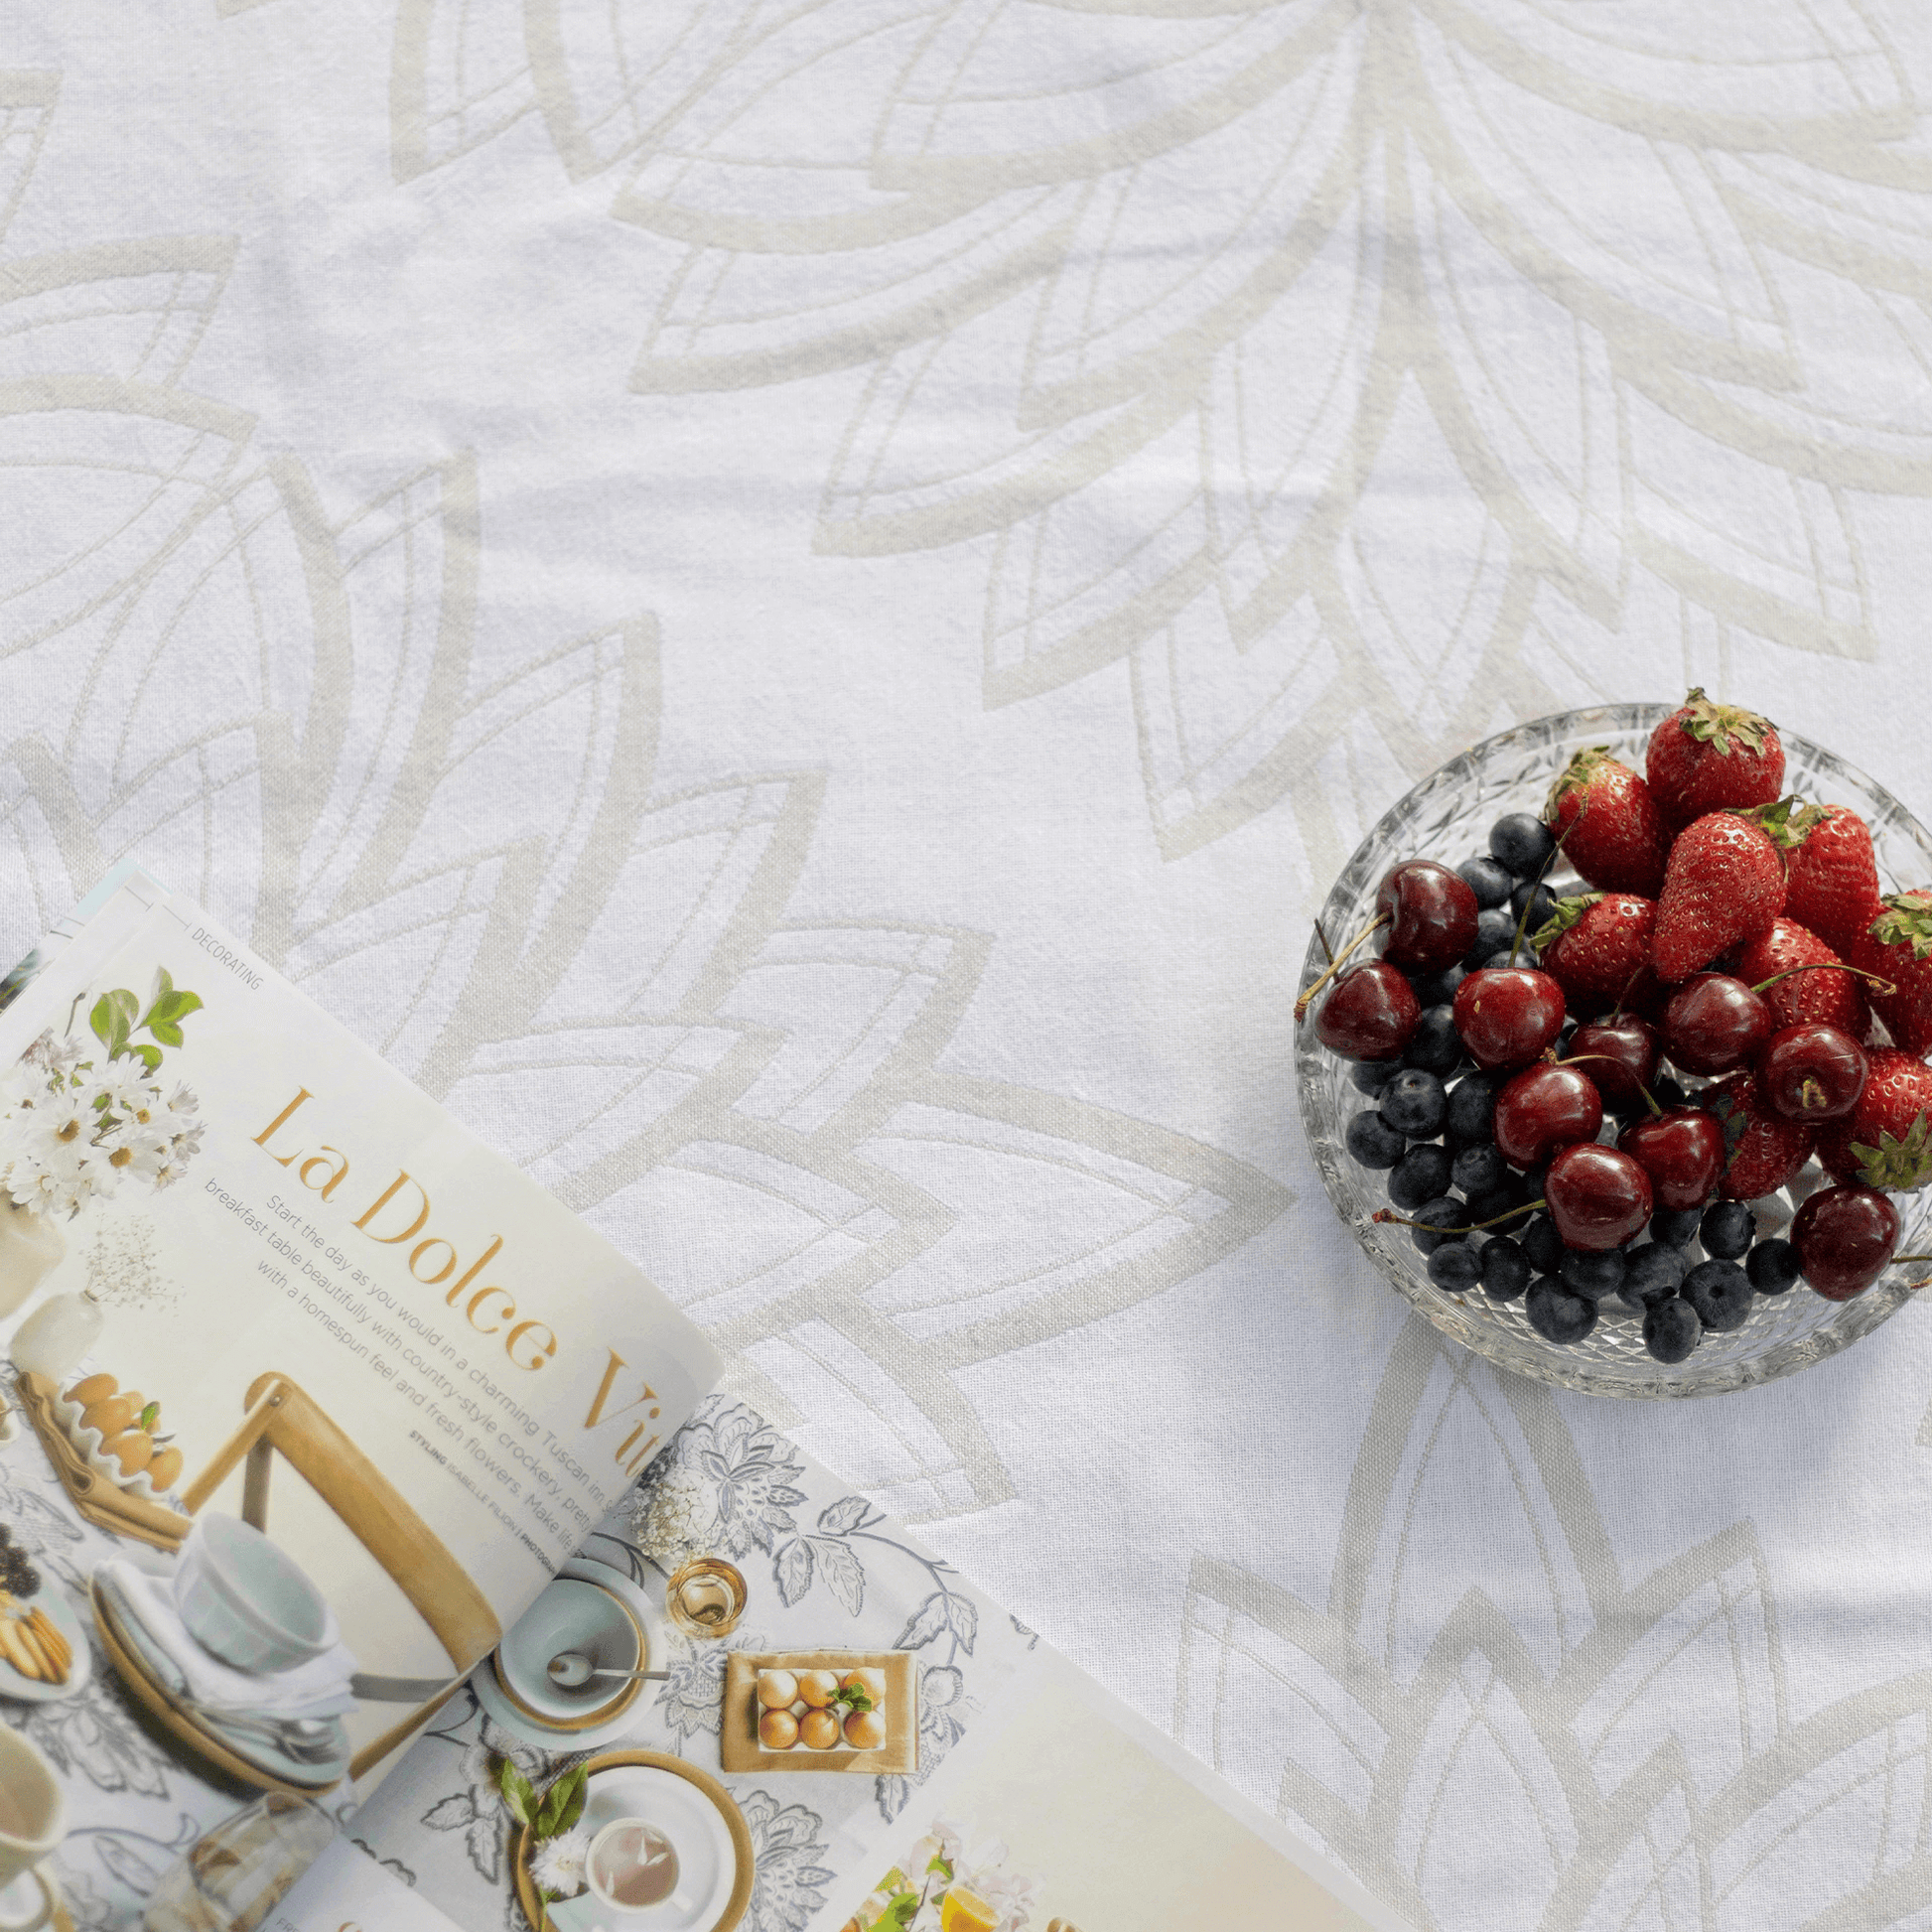 Turkish towel with strawberries and a magazine